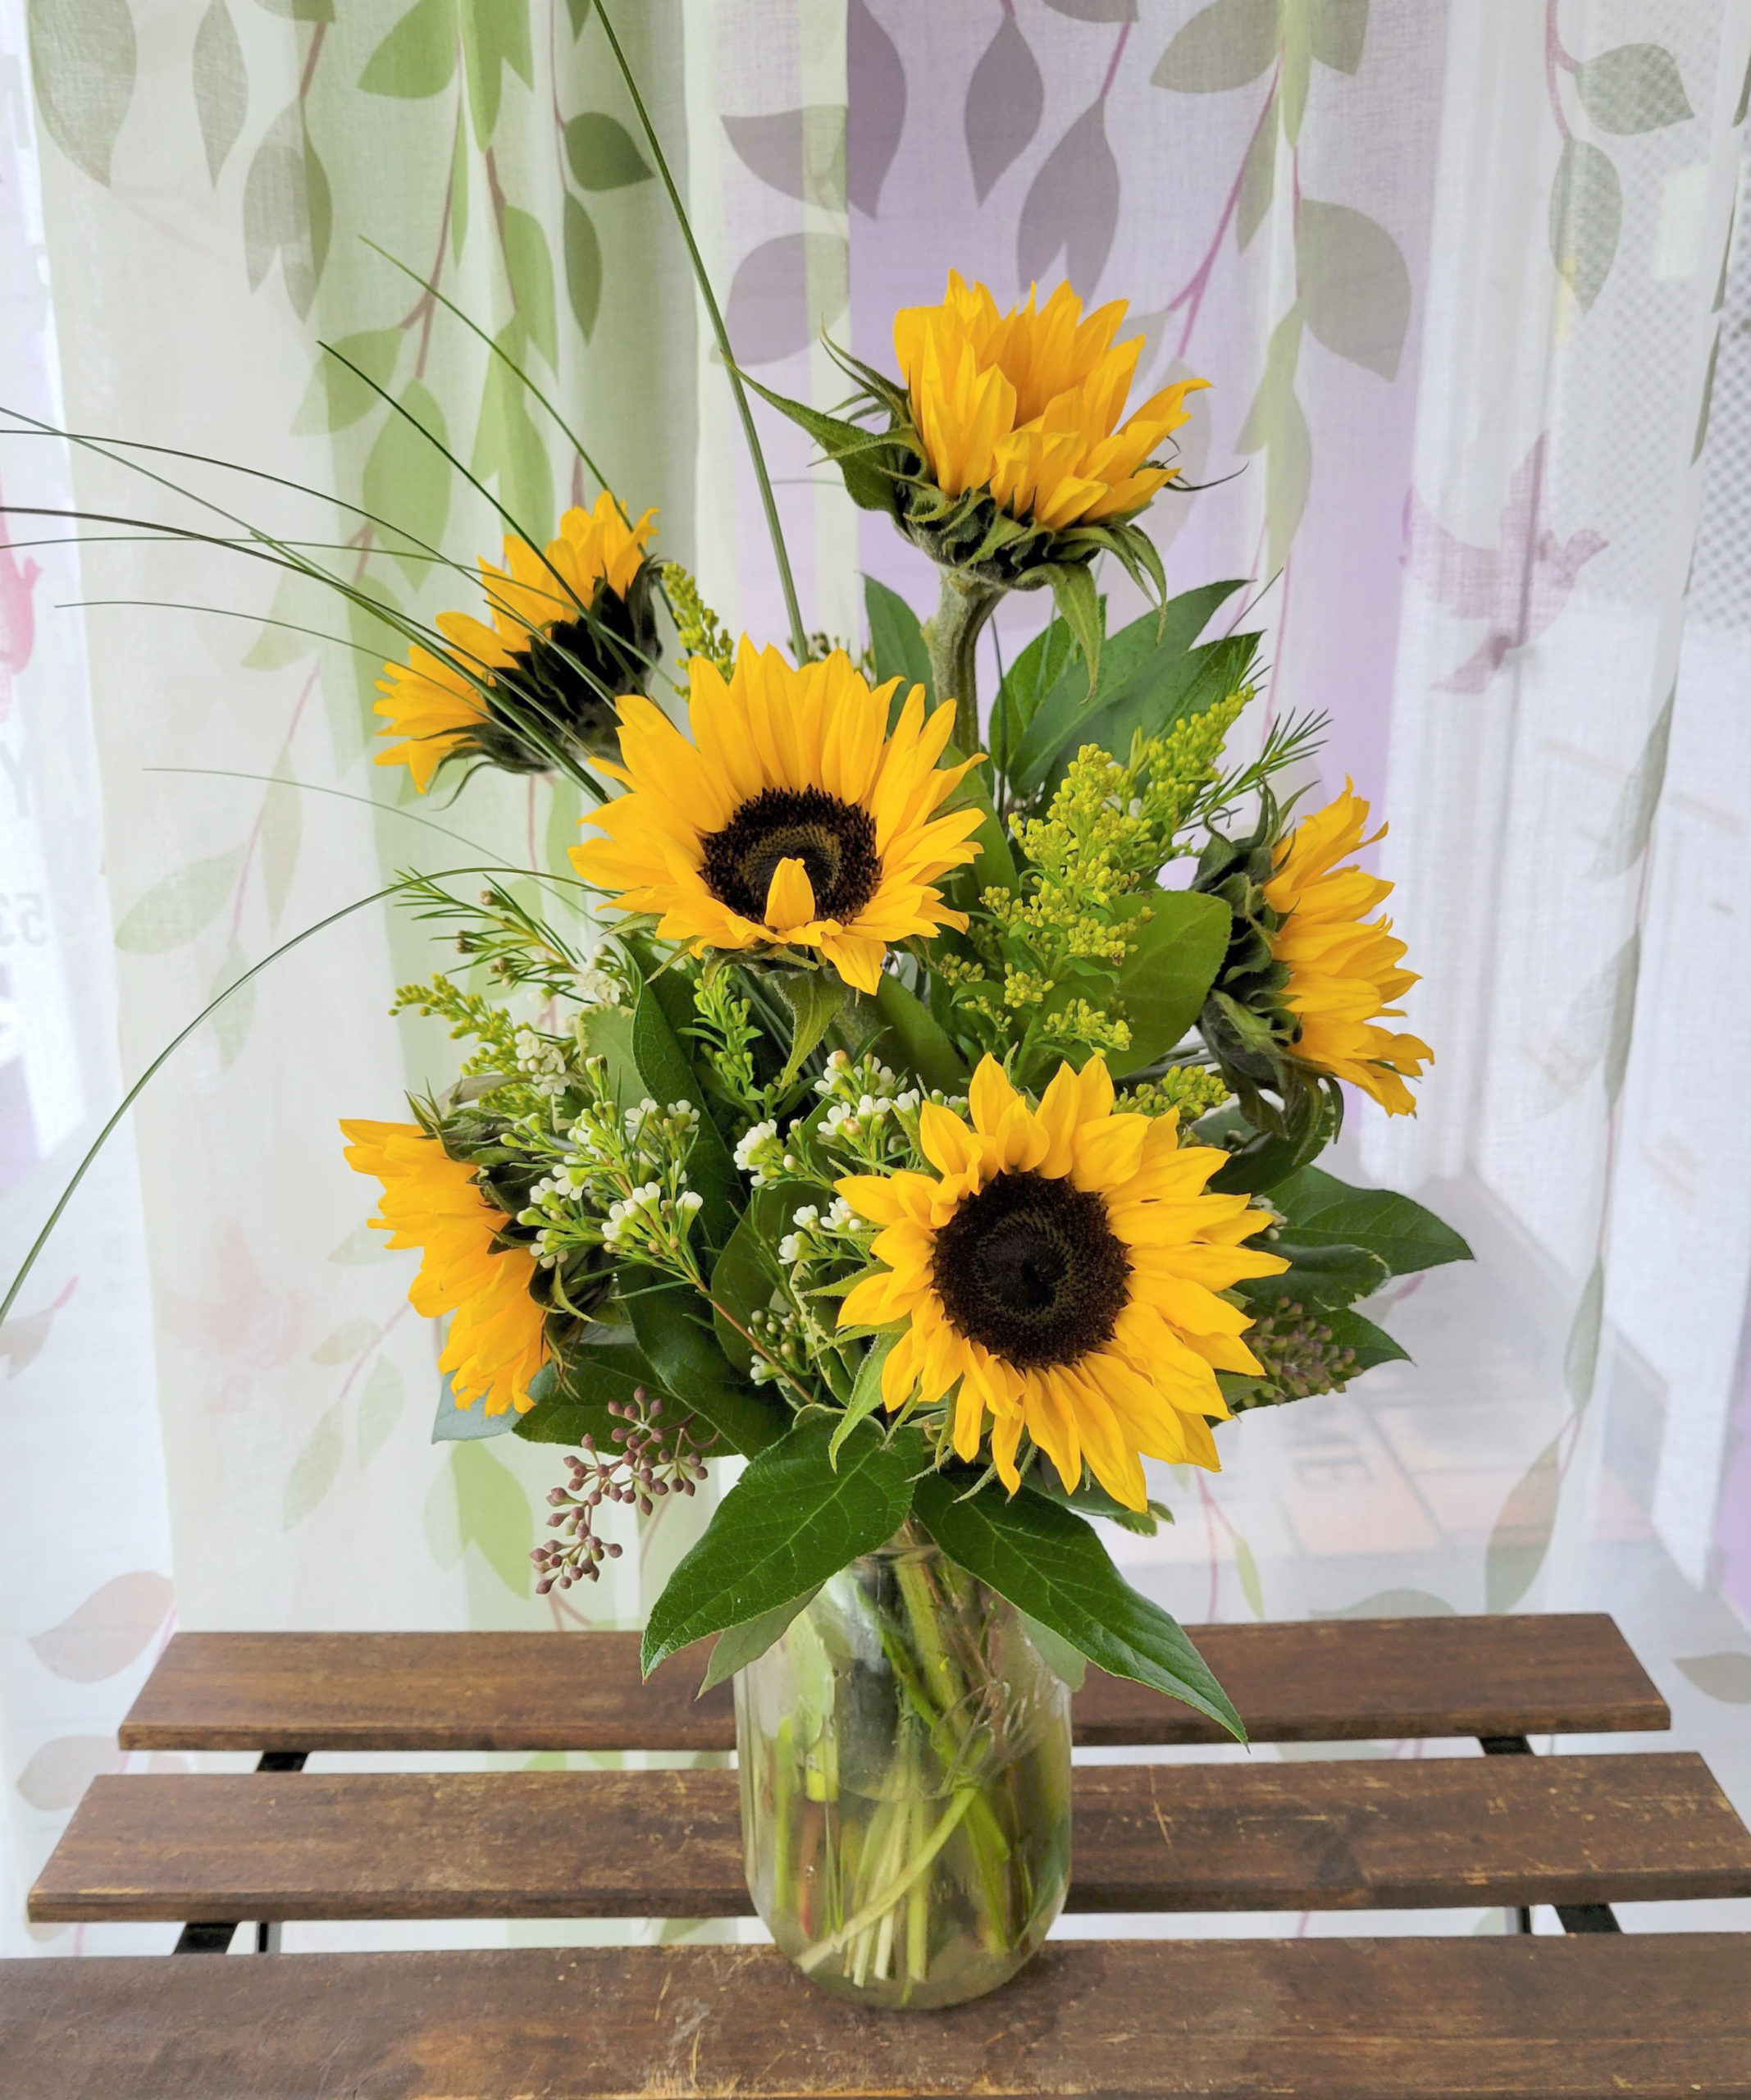 Six Sunflowers  Petals on Prince Floral Arrangements for All Occasions